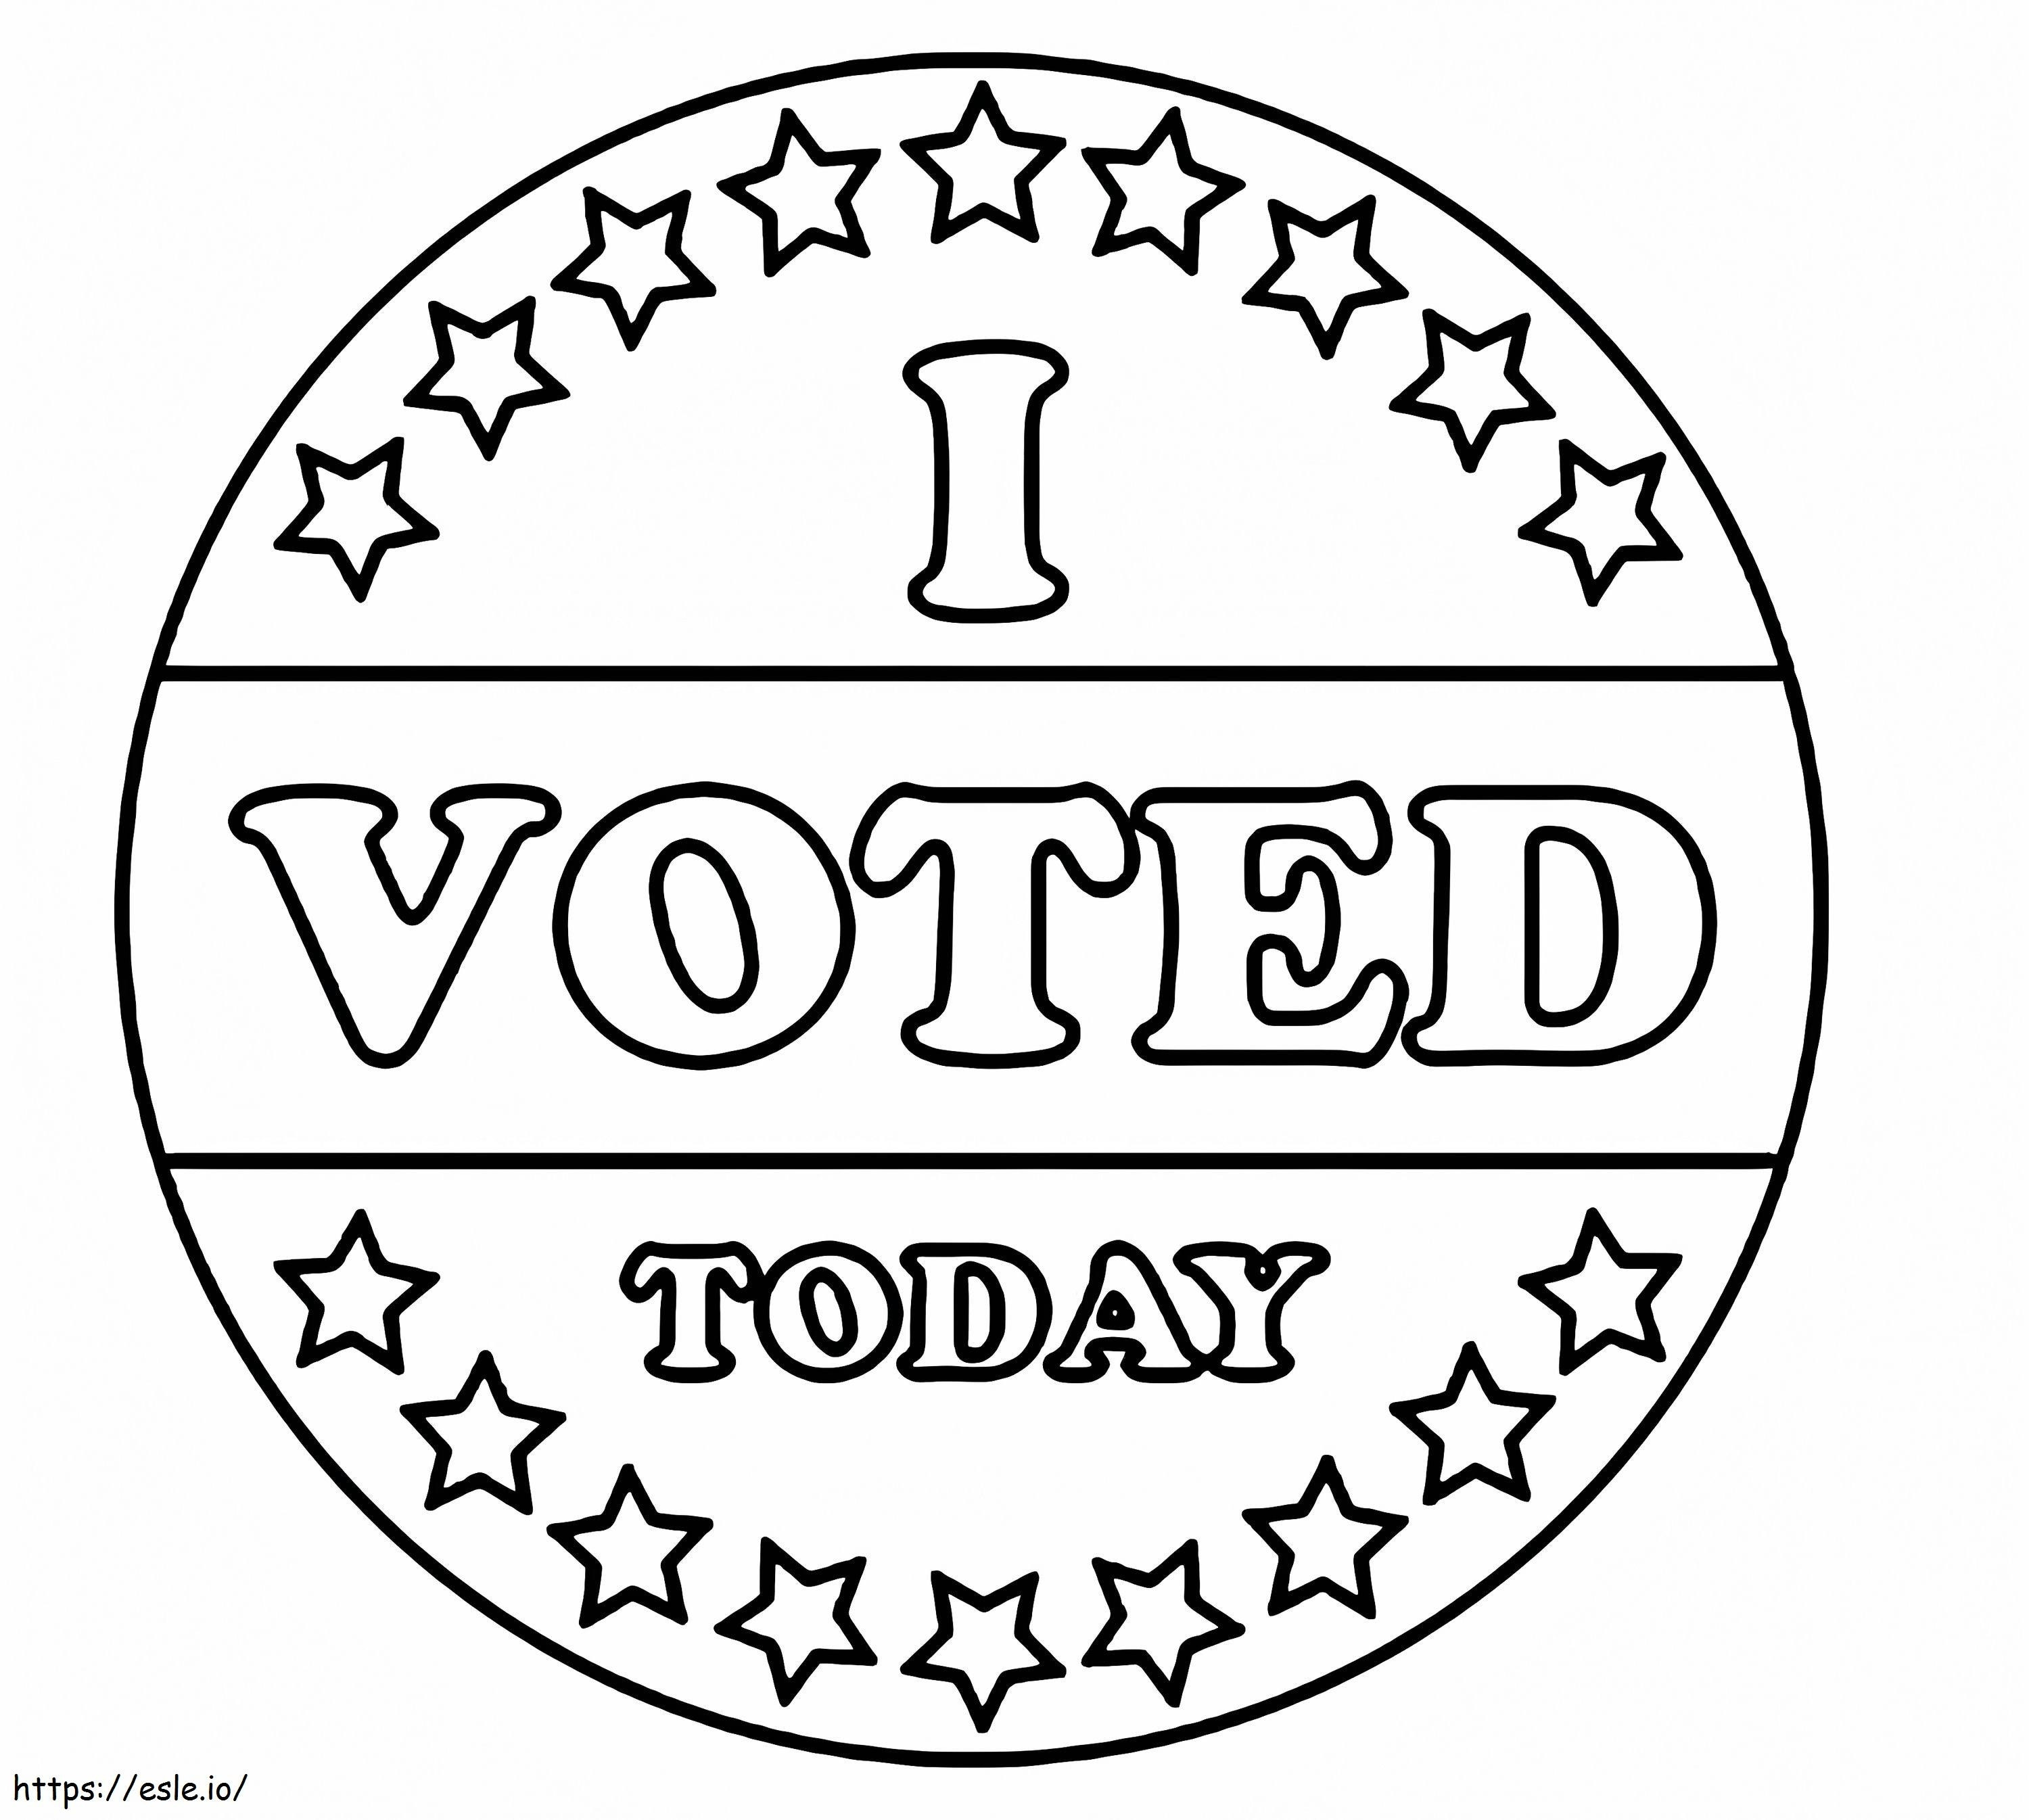 I Voted Today coloring page